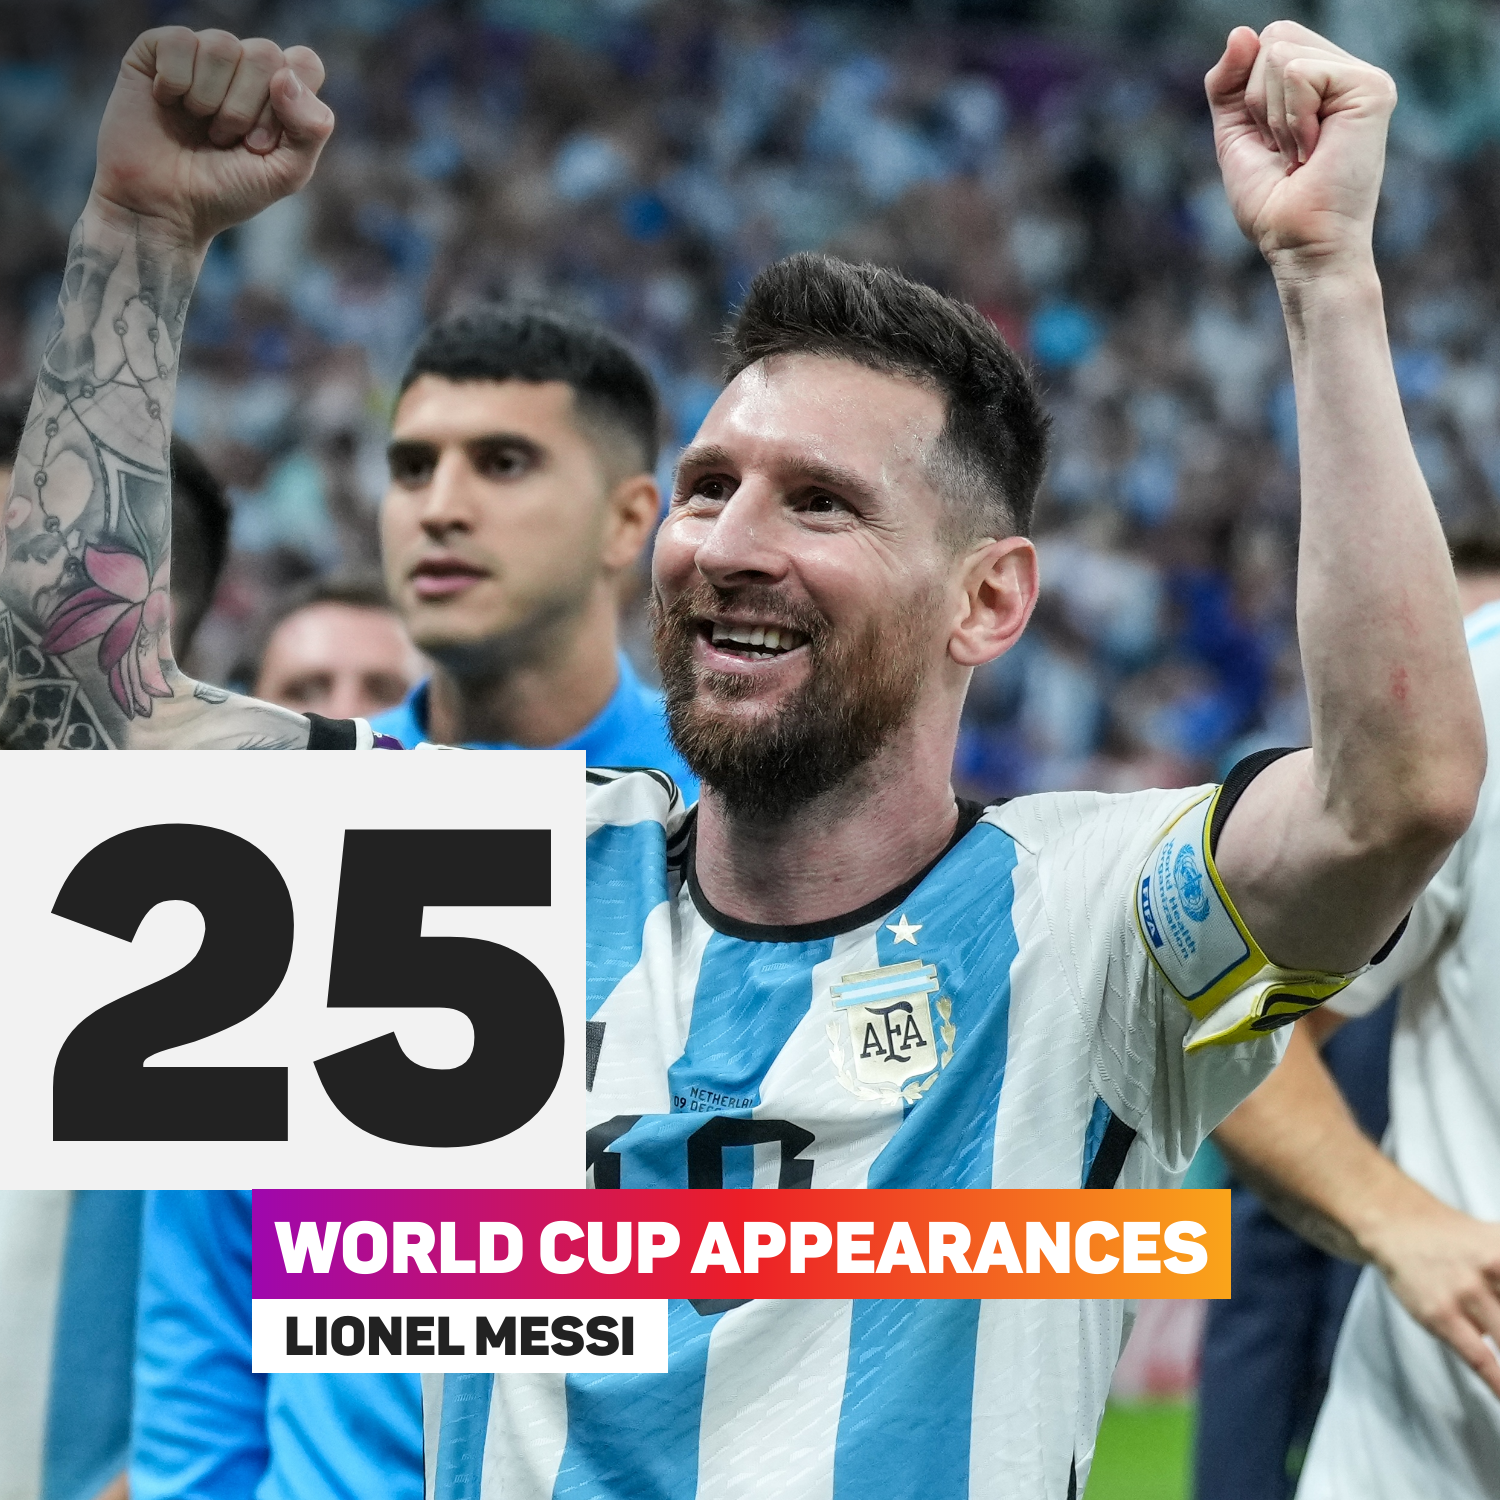 Lionel Messi will make his 25th World Cup appearance